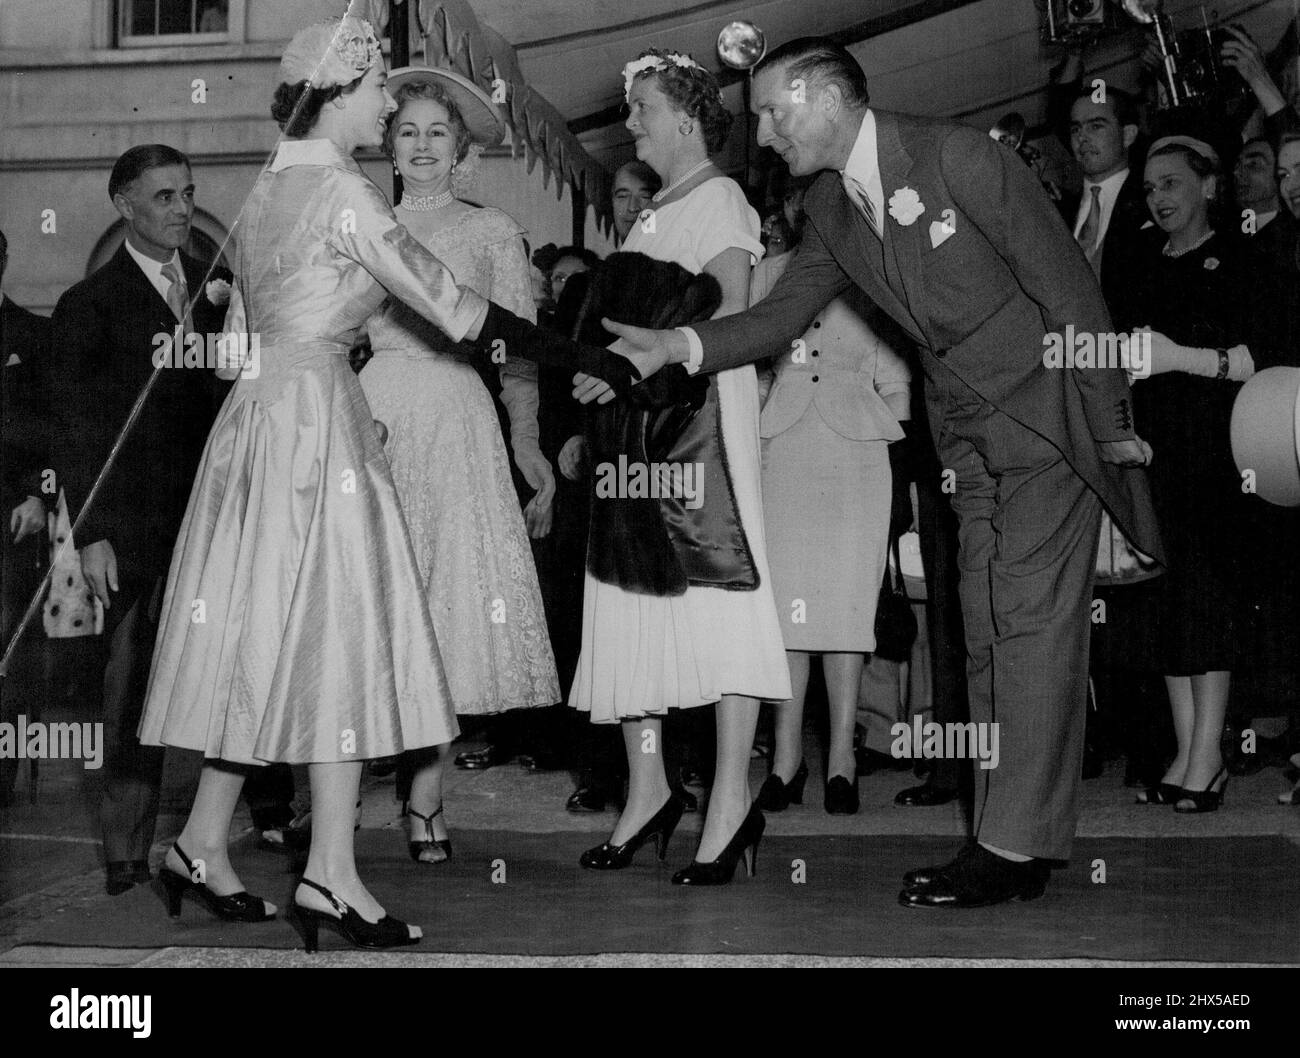 Queen Attends Friend's Wedding Reception -- The Queen is received on arrival at Hutchinson House, Stratford Palace, London, to-day (Wednesday) to attend the wedding reception of her friend, Lady Mary Baillie - Hamilton and Mr. Adrian Bailey, who were married at St. James' Spanish Place, W. Lady Mary was a maid of honour to the Queen at the Coronation. She is the daughter of the Earl and Countess of Haddington. July 21, 1954. (Photo by Reuterphoto). Stock Photo